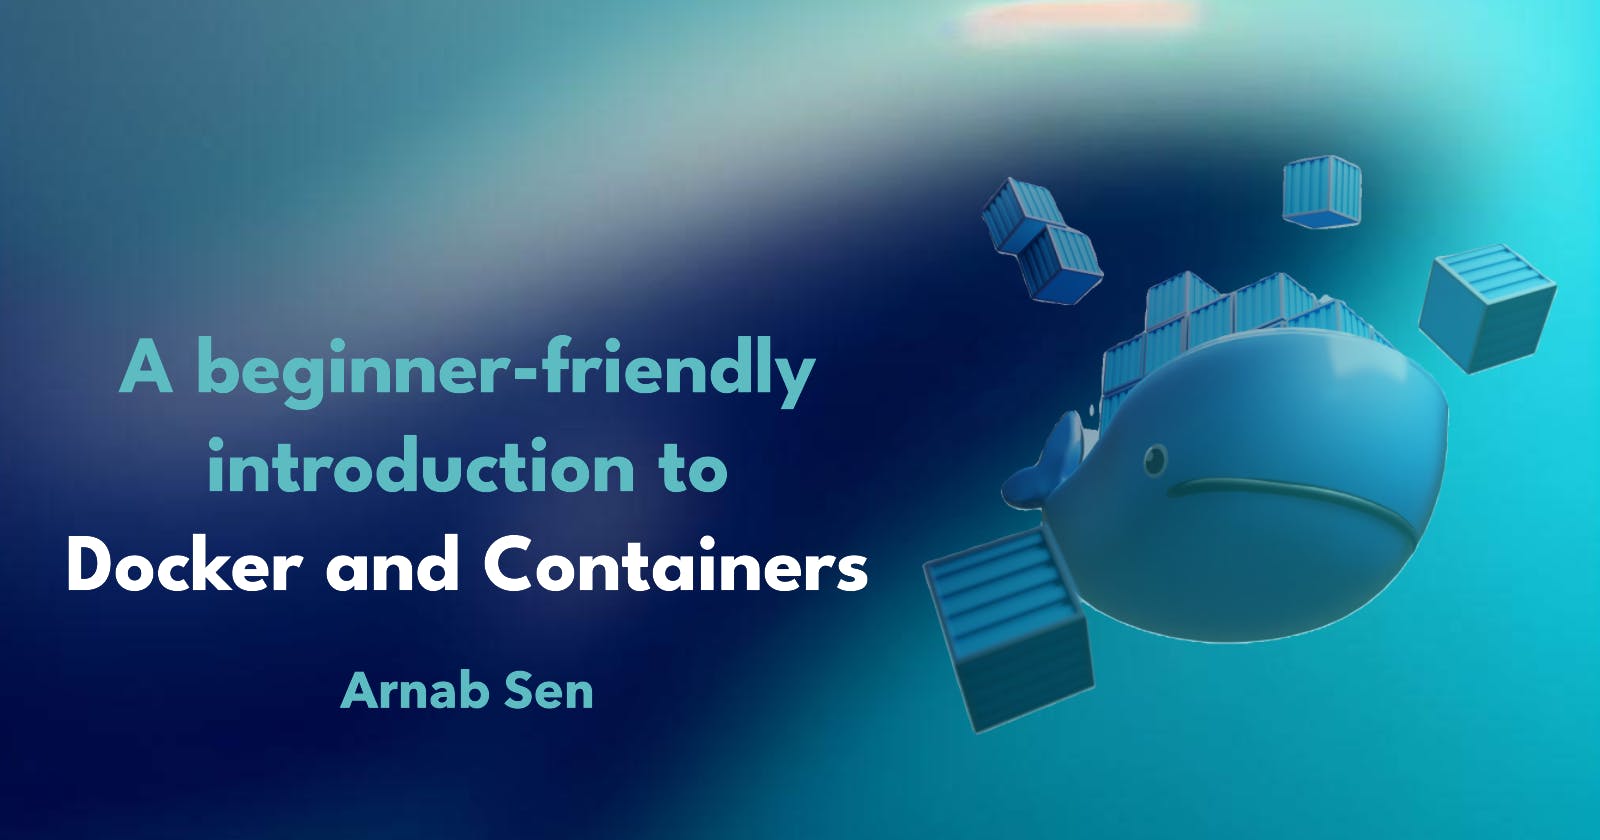 A beginner-friendly introduction to Docker and Containers